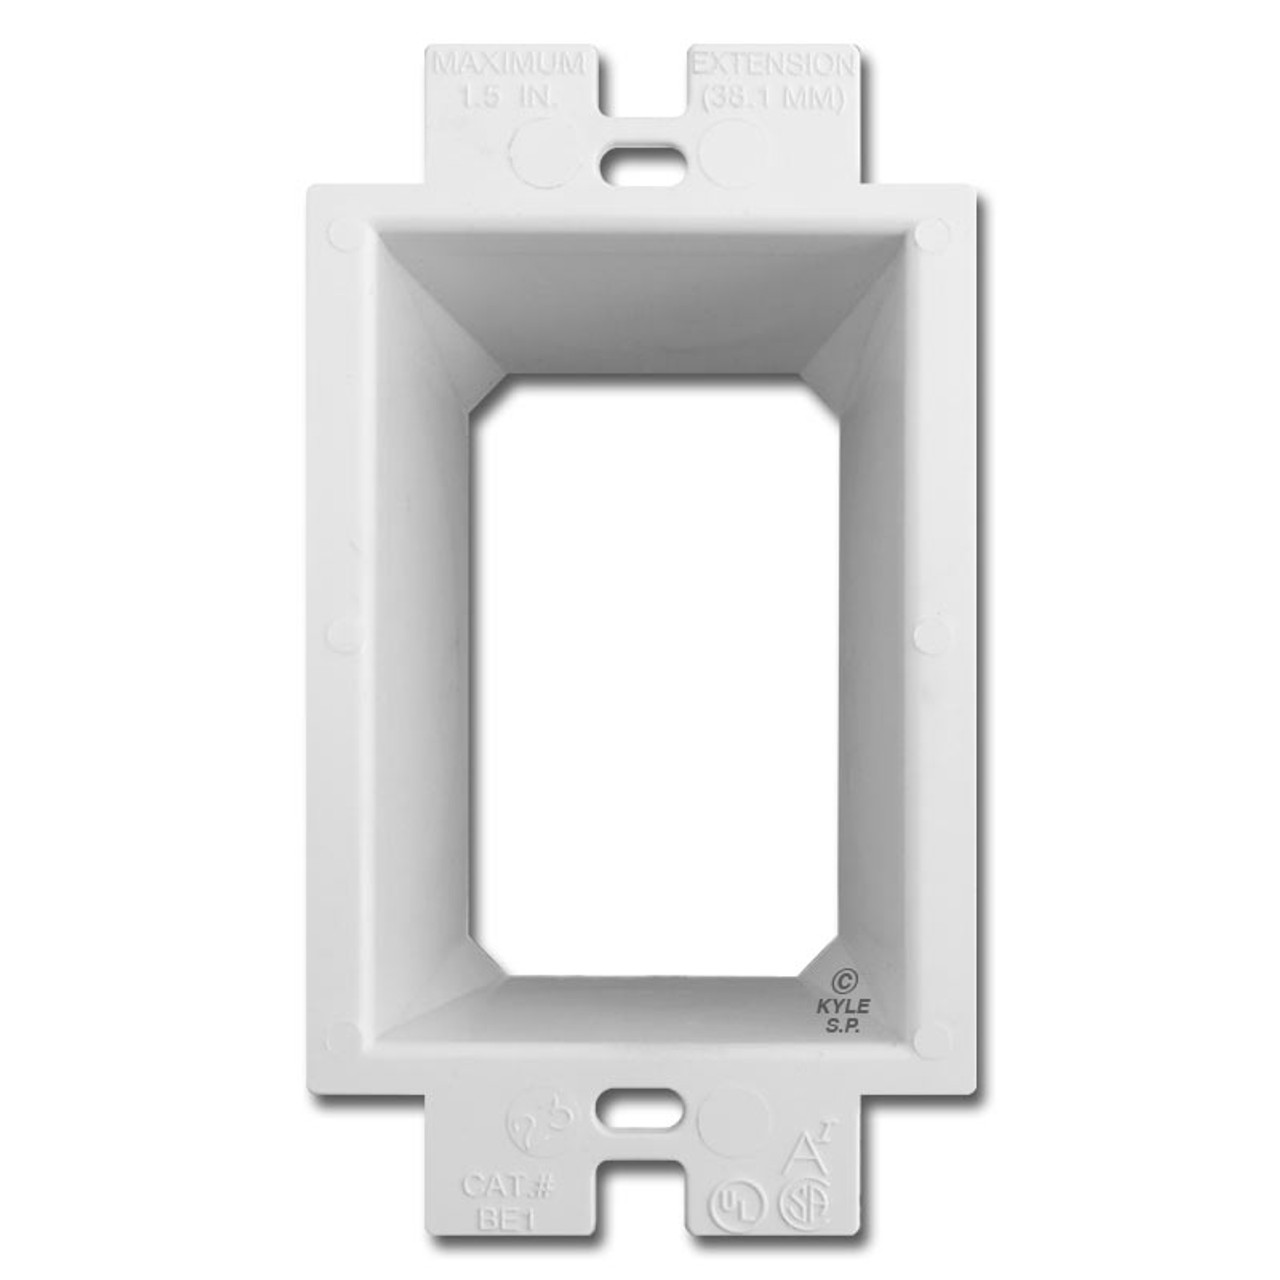 Plastic Box Extender Goof Ring - Raise Deep Outlet Up 1.5'' To Surface